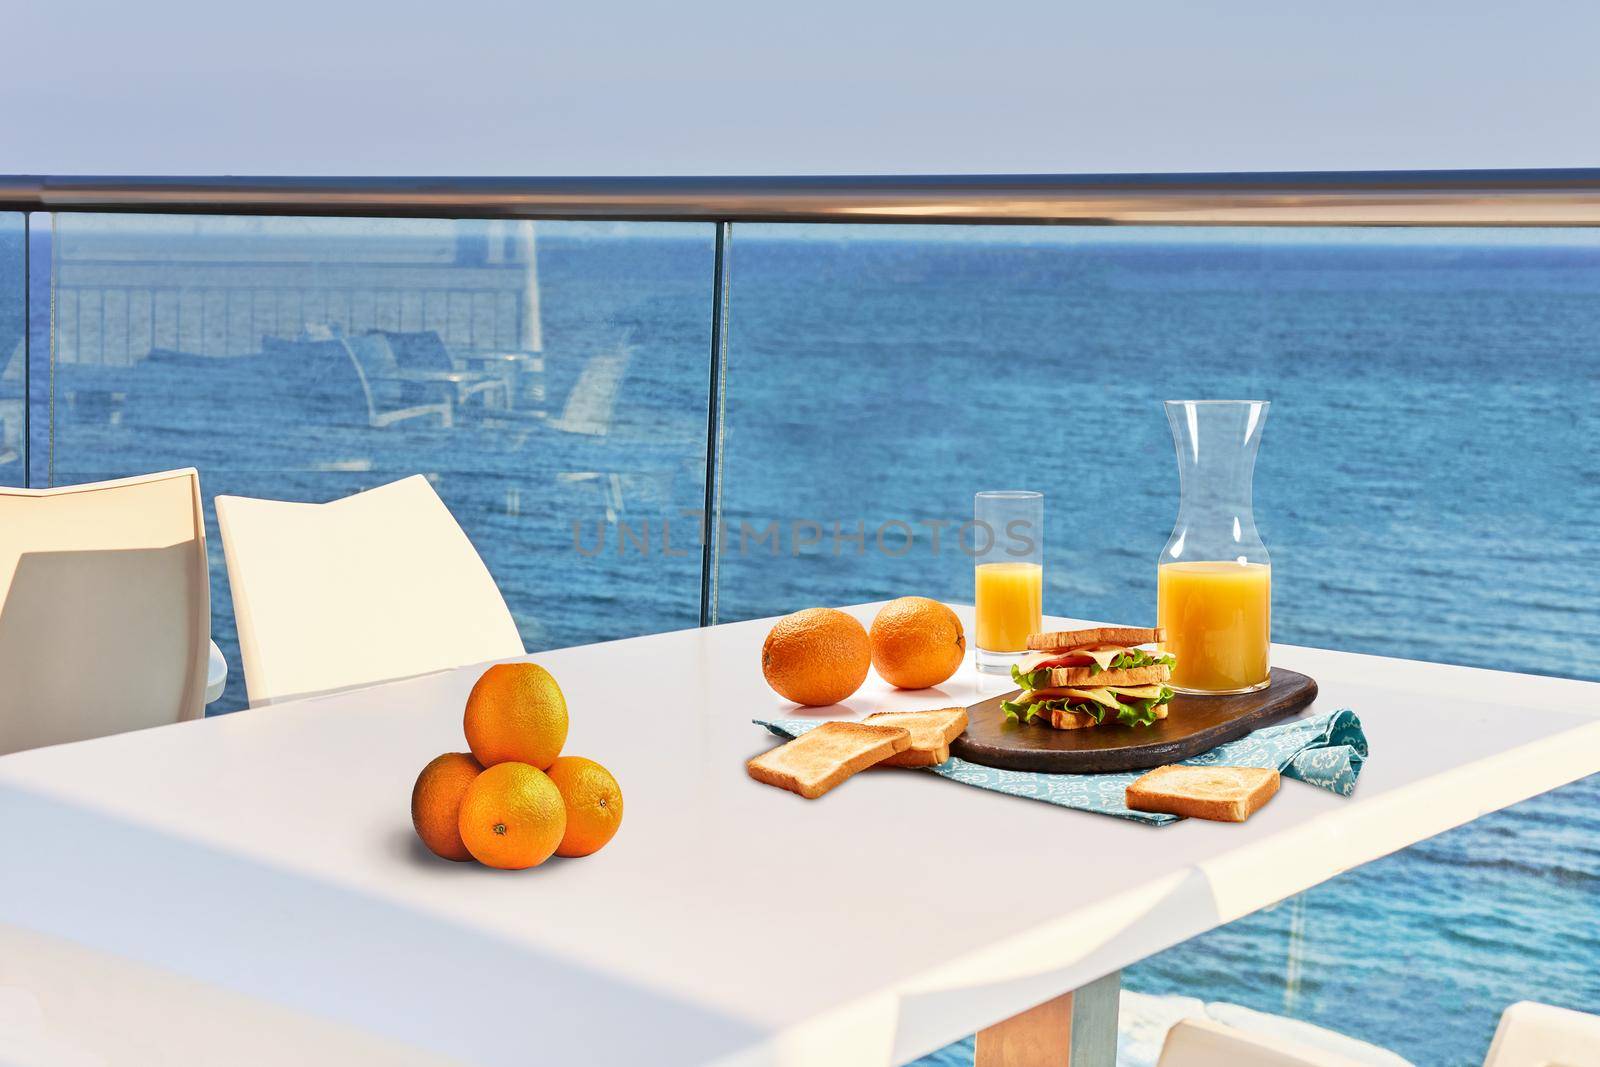 Table for two served with a breakfast on outdoor hotel balcony with a sea view. by nazarovsergey